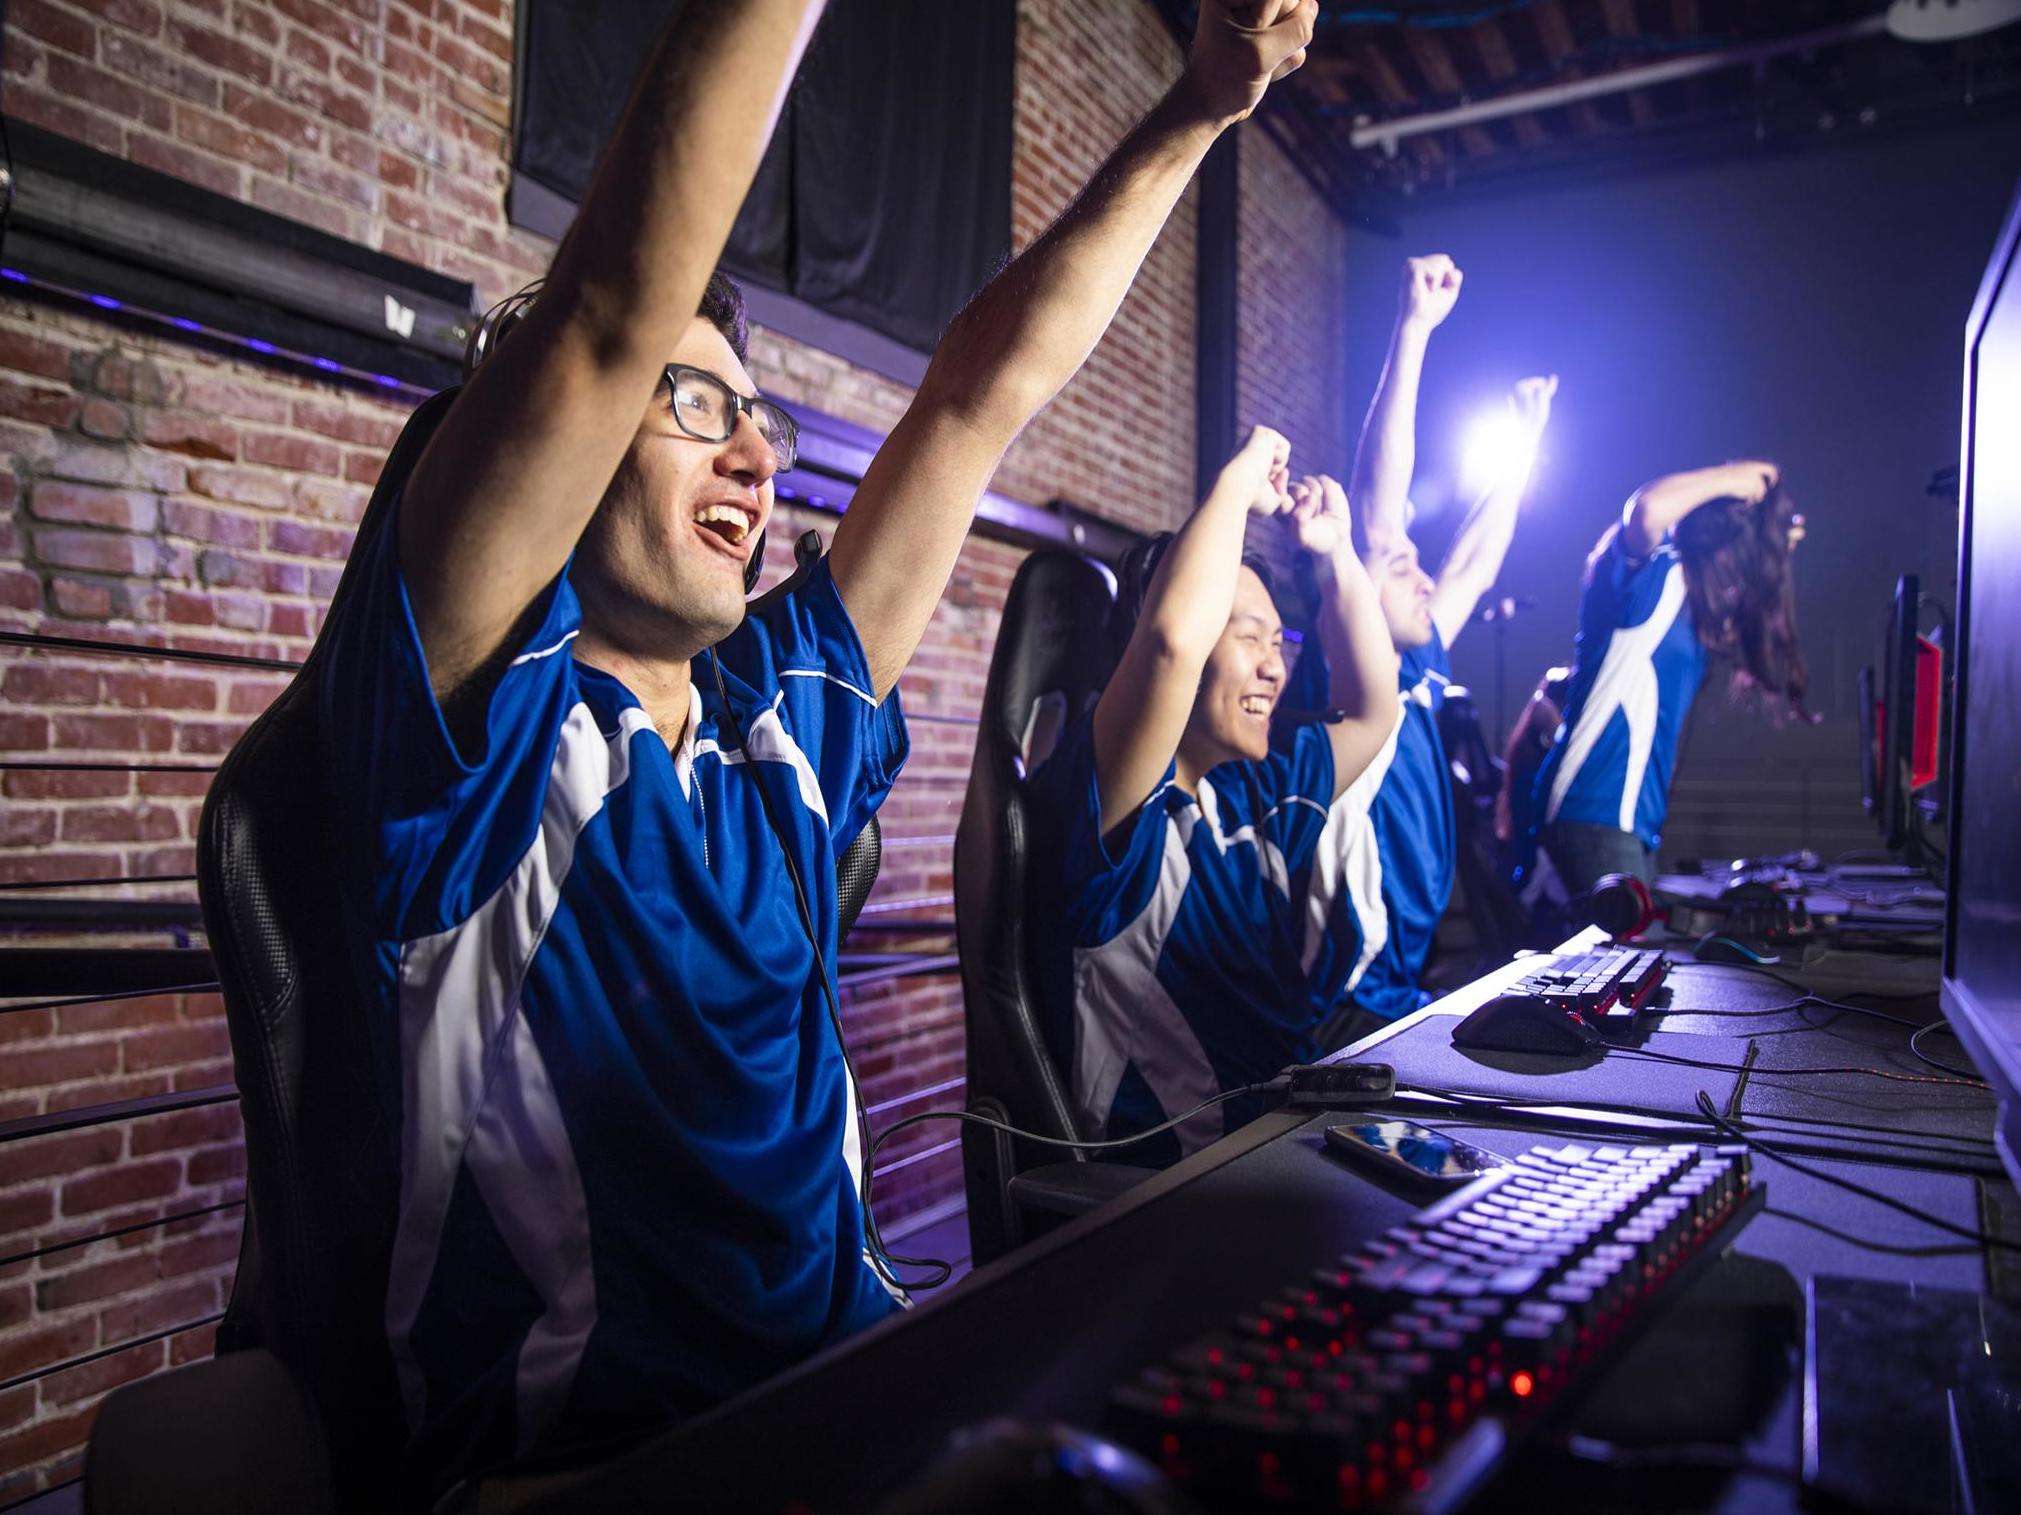 Esports have crept into the mainstream, attracting new fans and investment